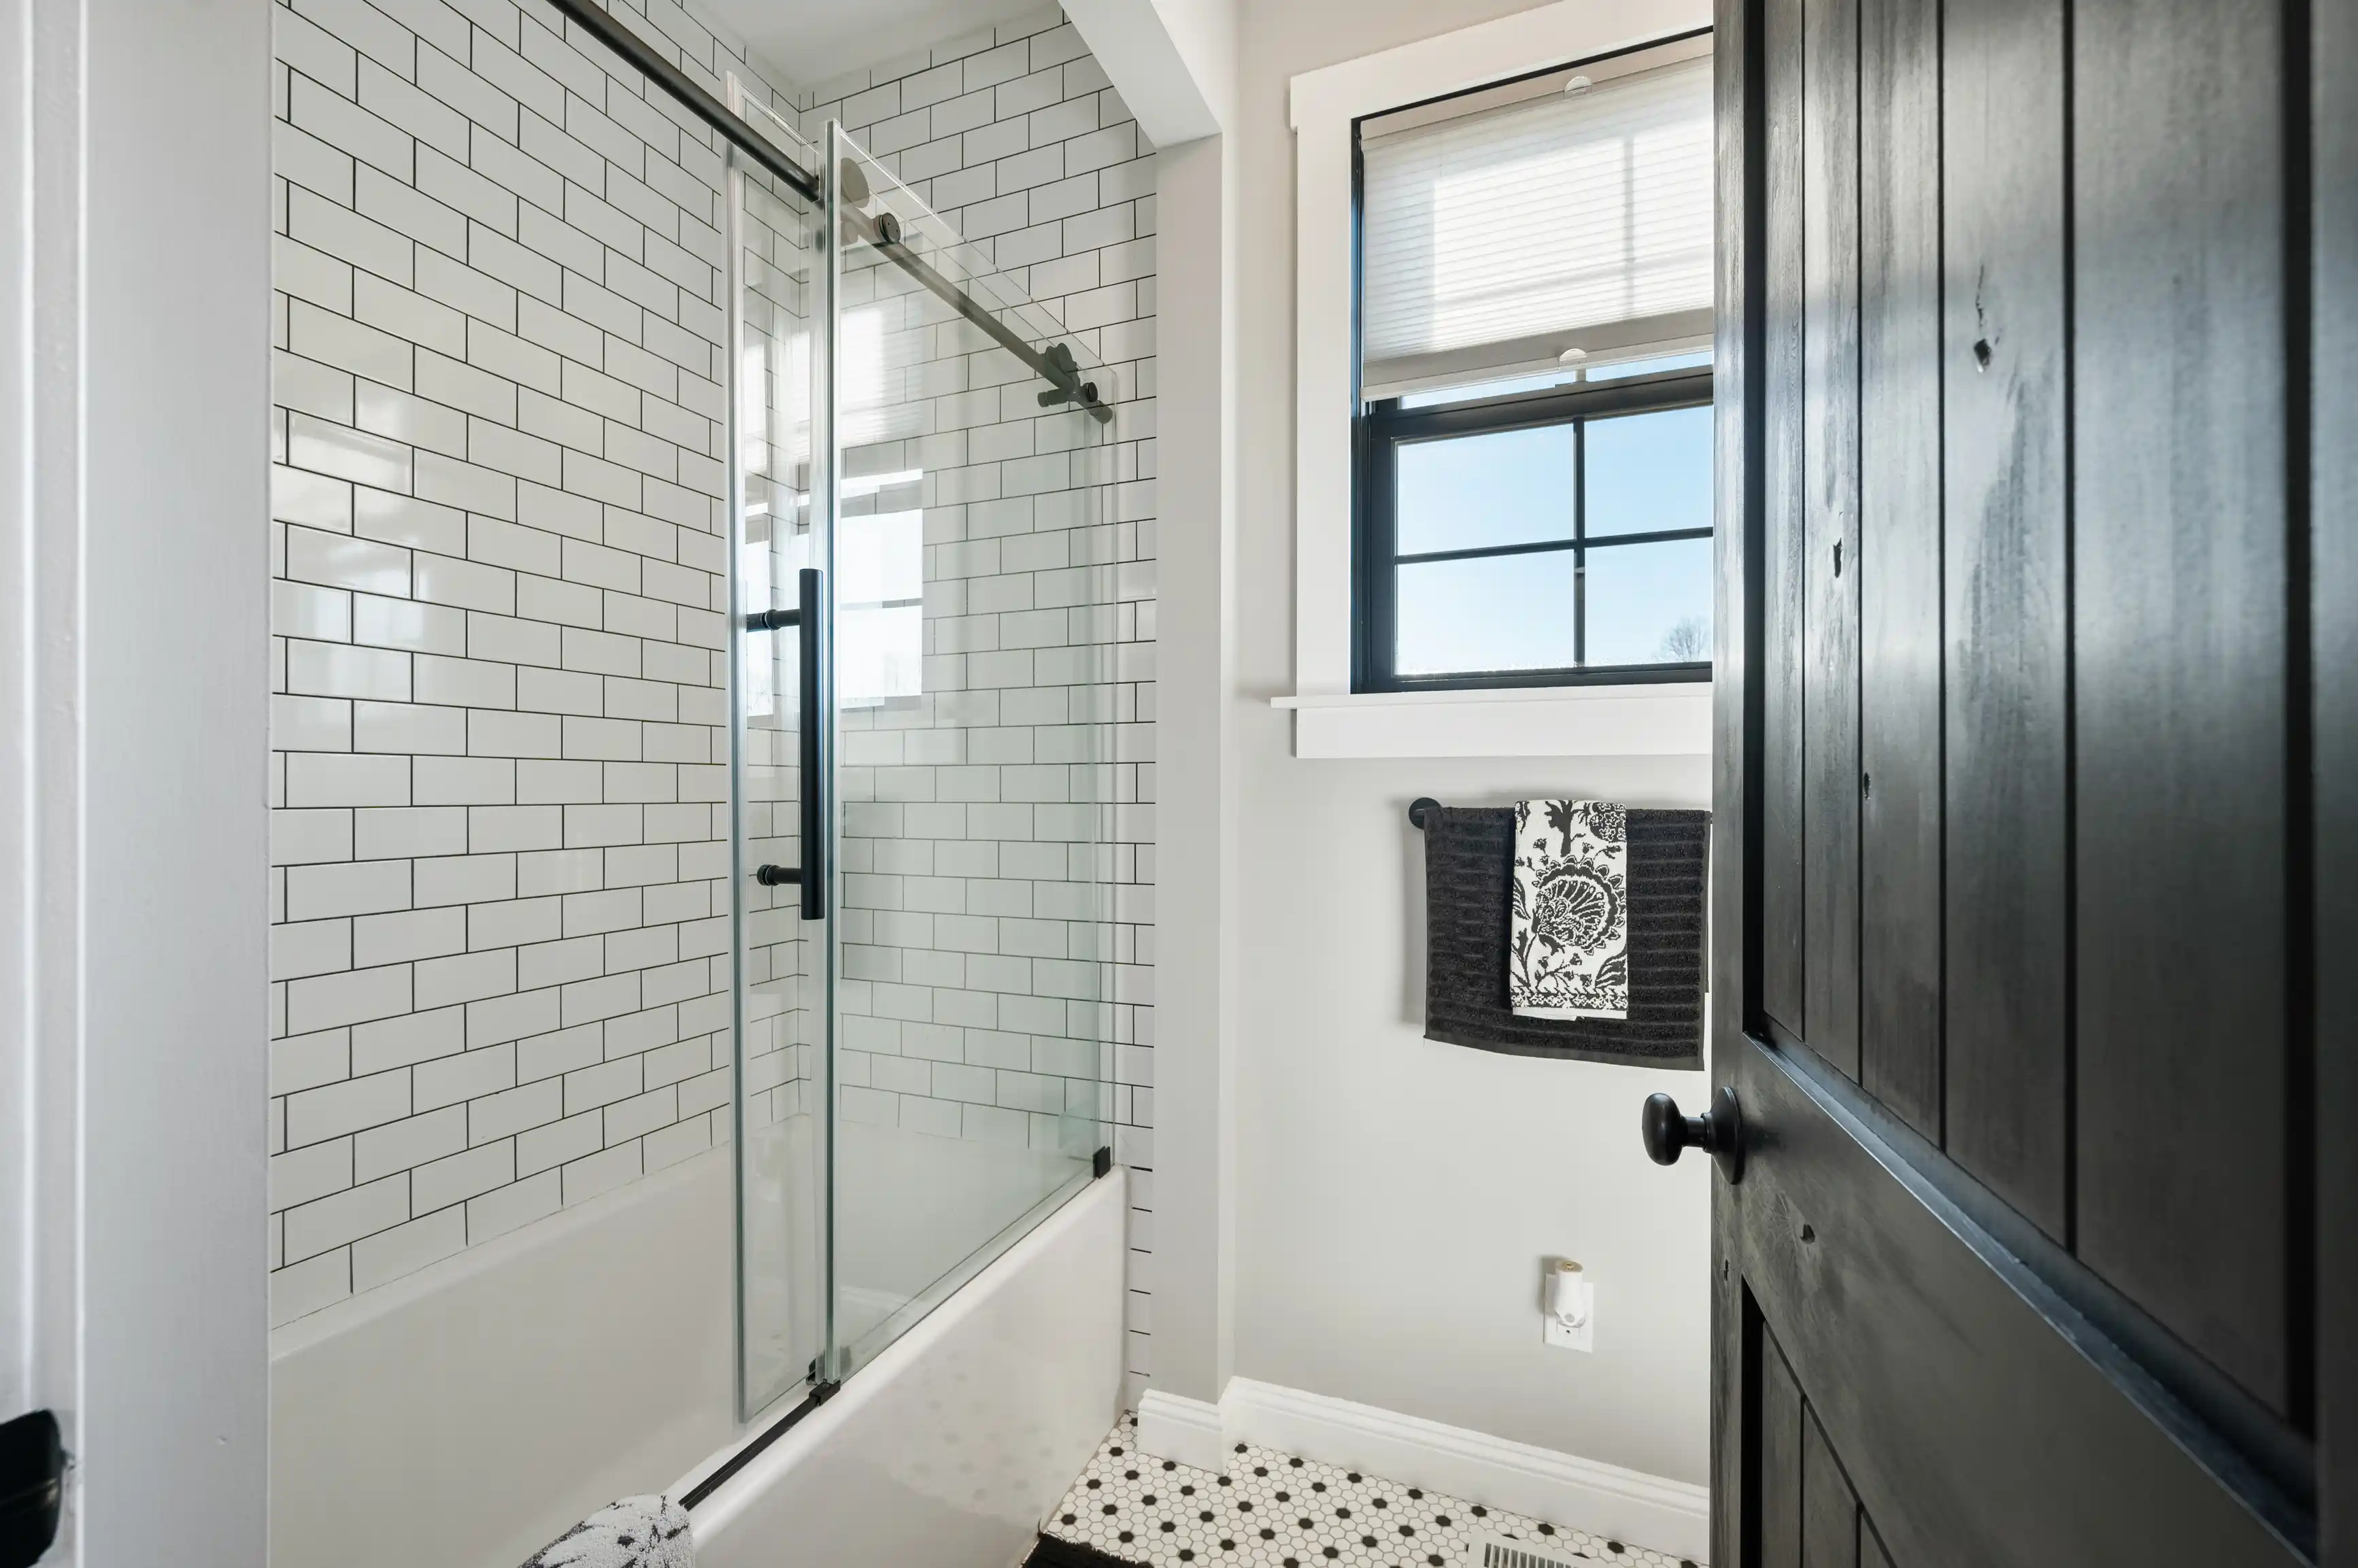 A modern bathroom with white subway tiles, glass door shower, a black framed window with blinds, patterned black and white floor tiles, and a dark wood linen closet.